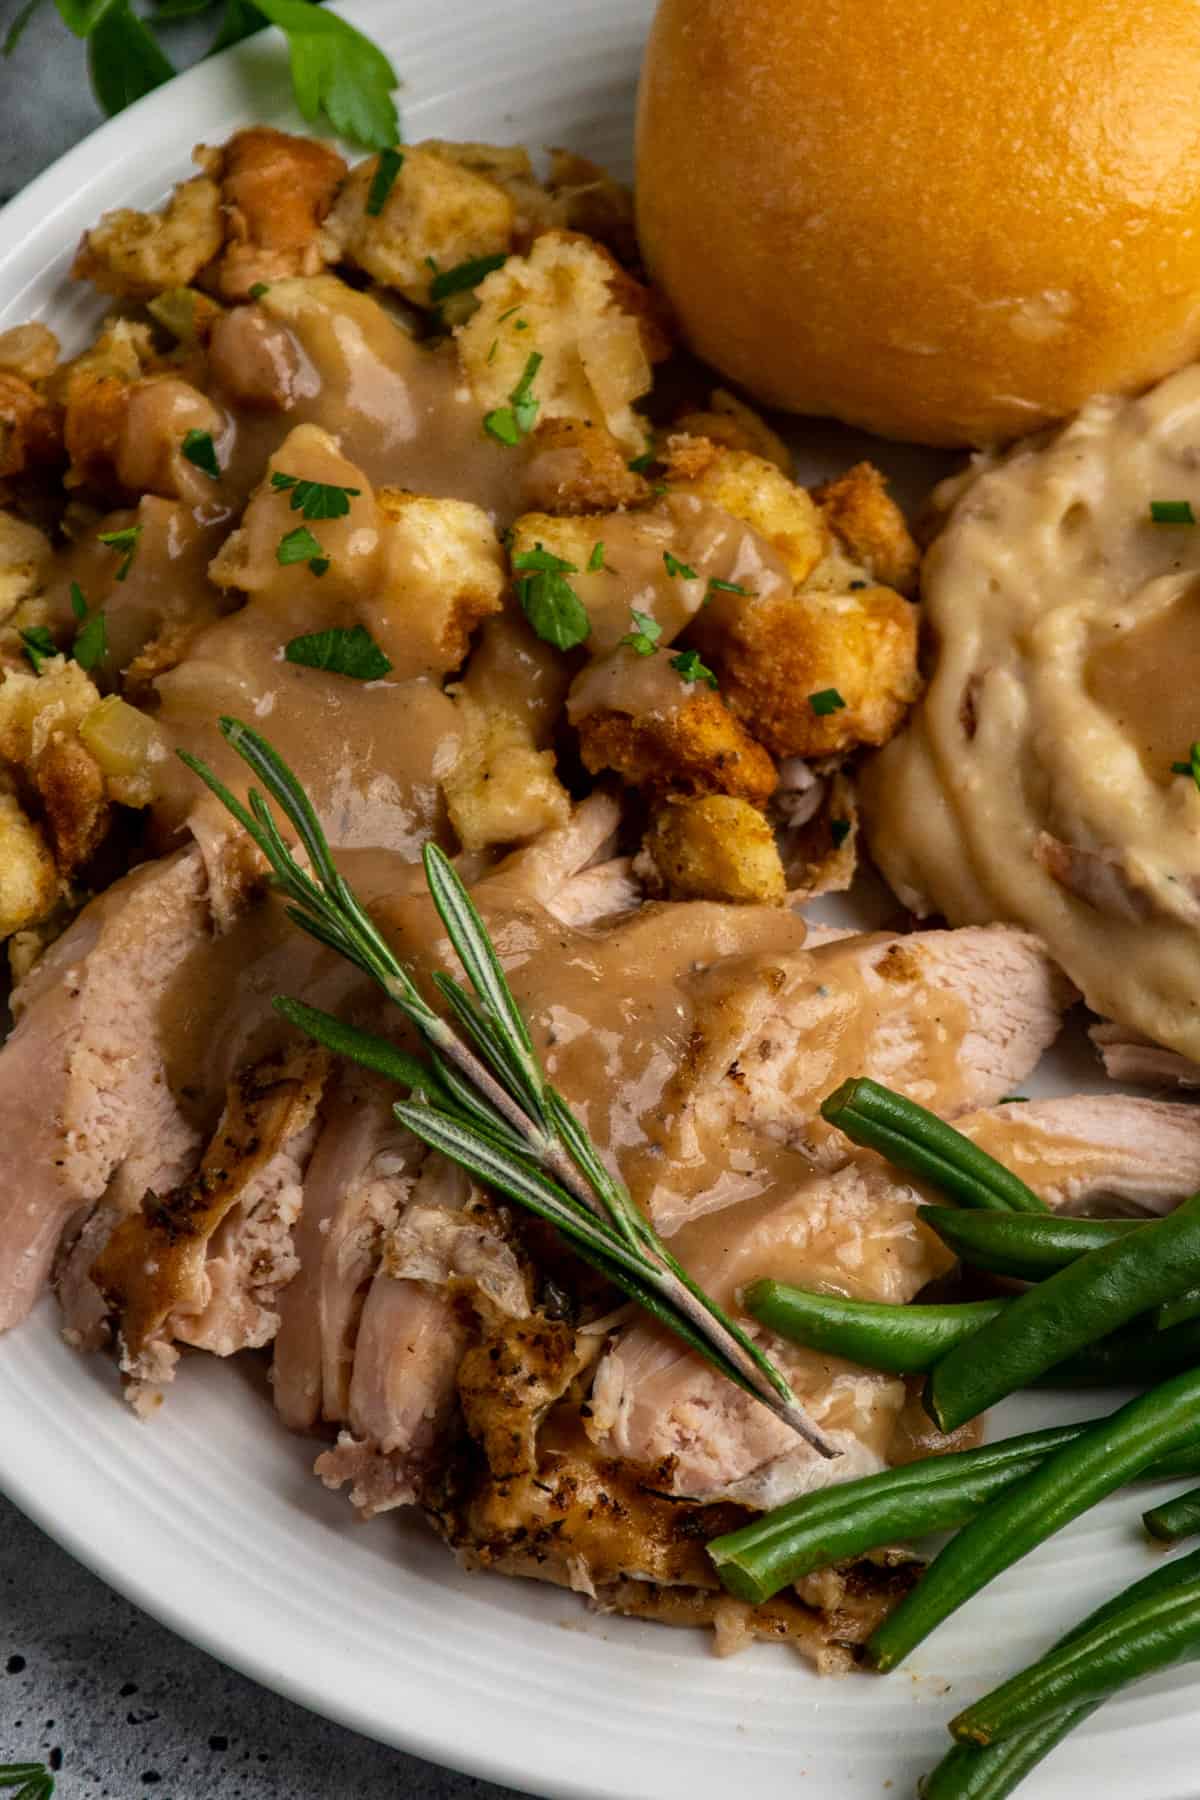 Slow cooker turkey breast on a white plate with stuffing and mashed potatoes.